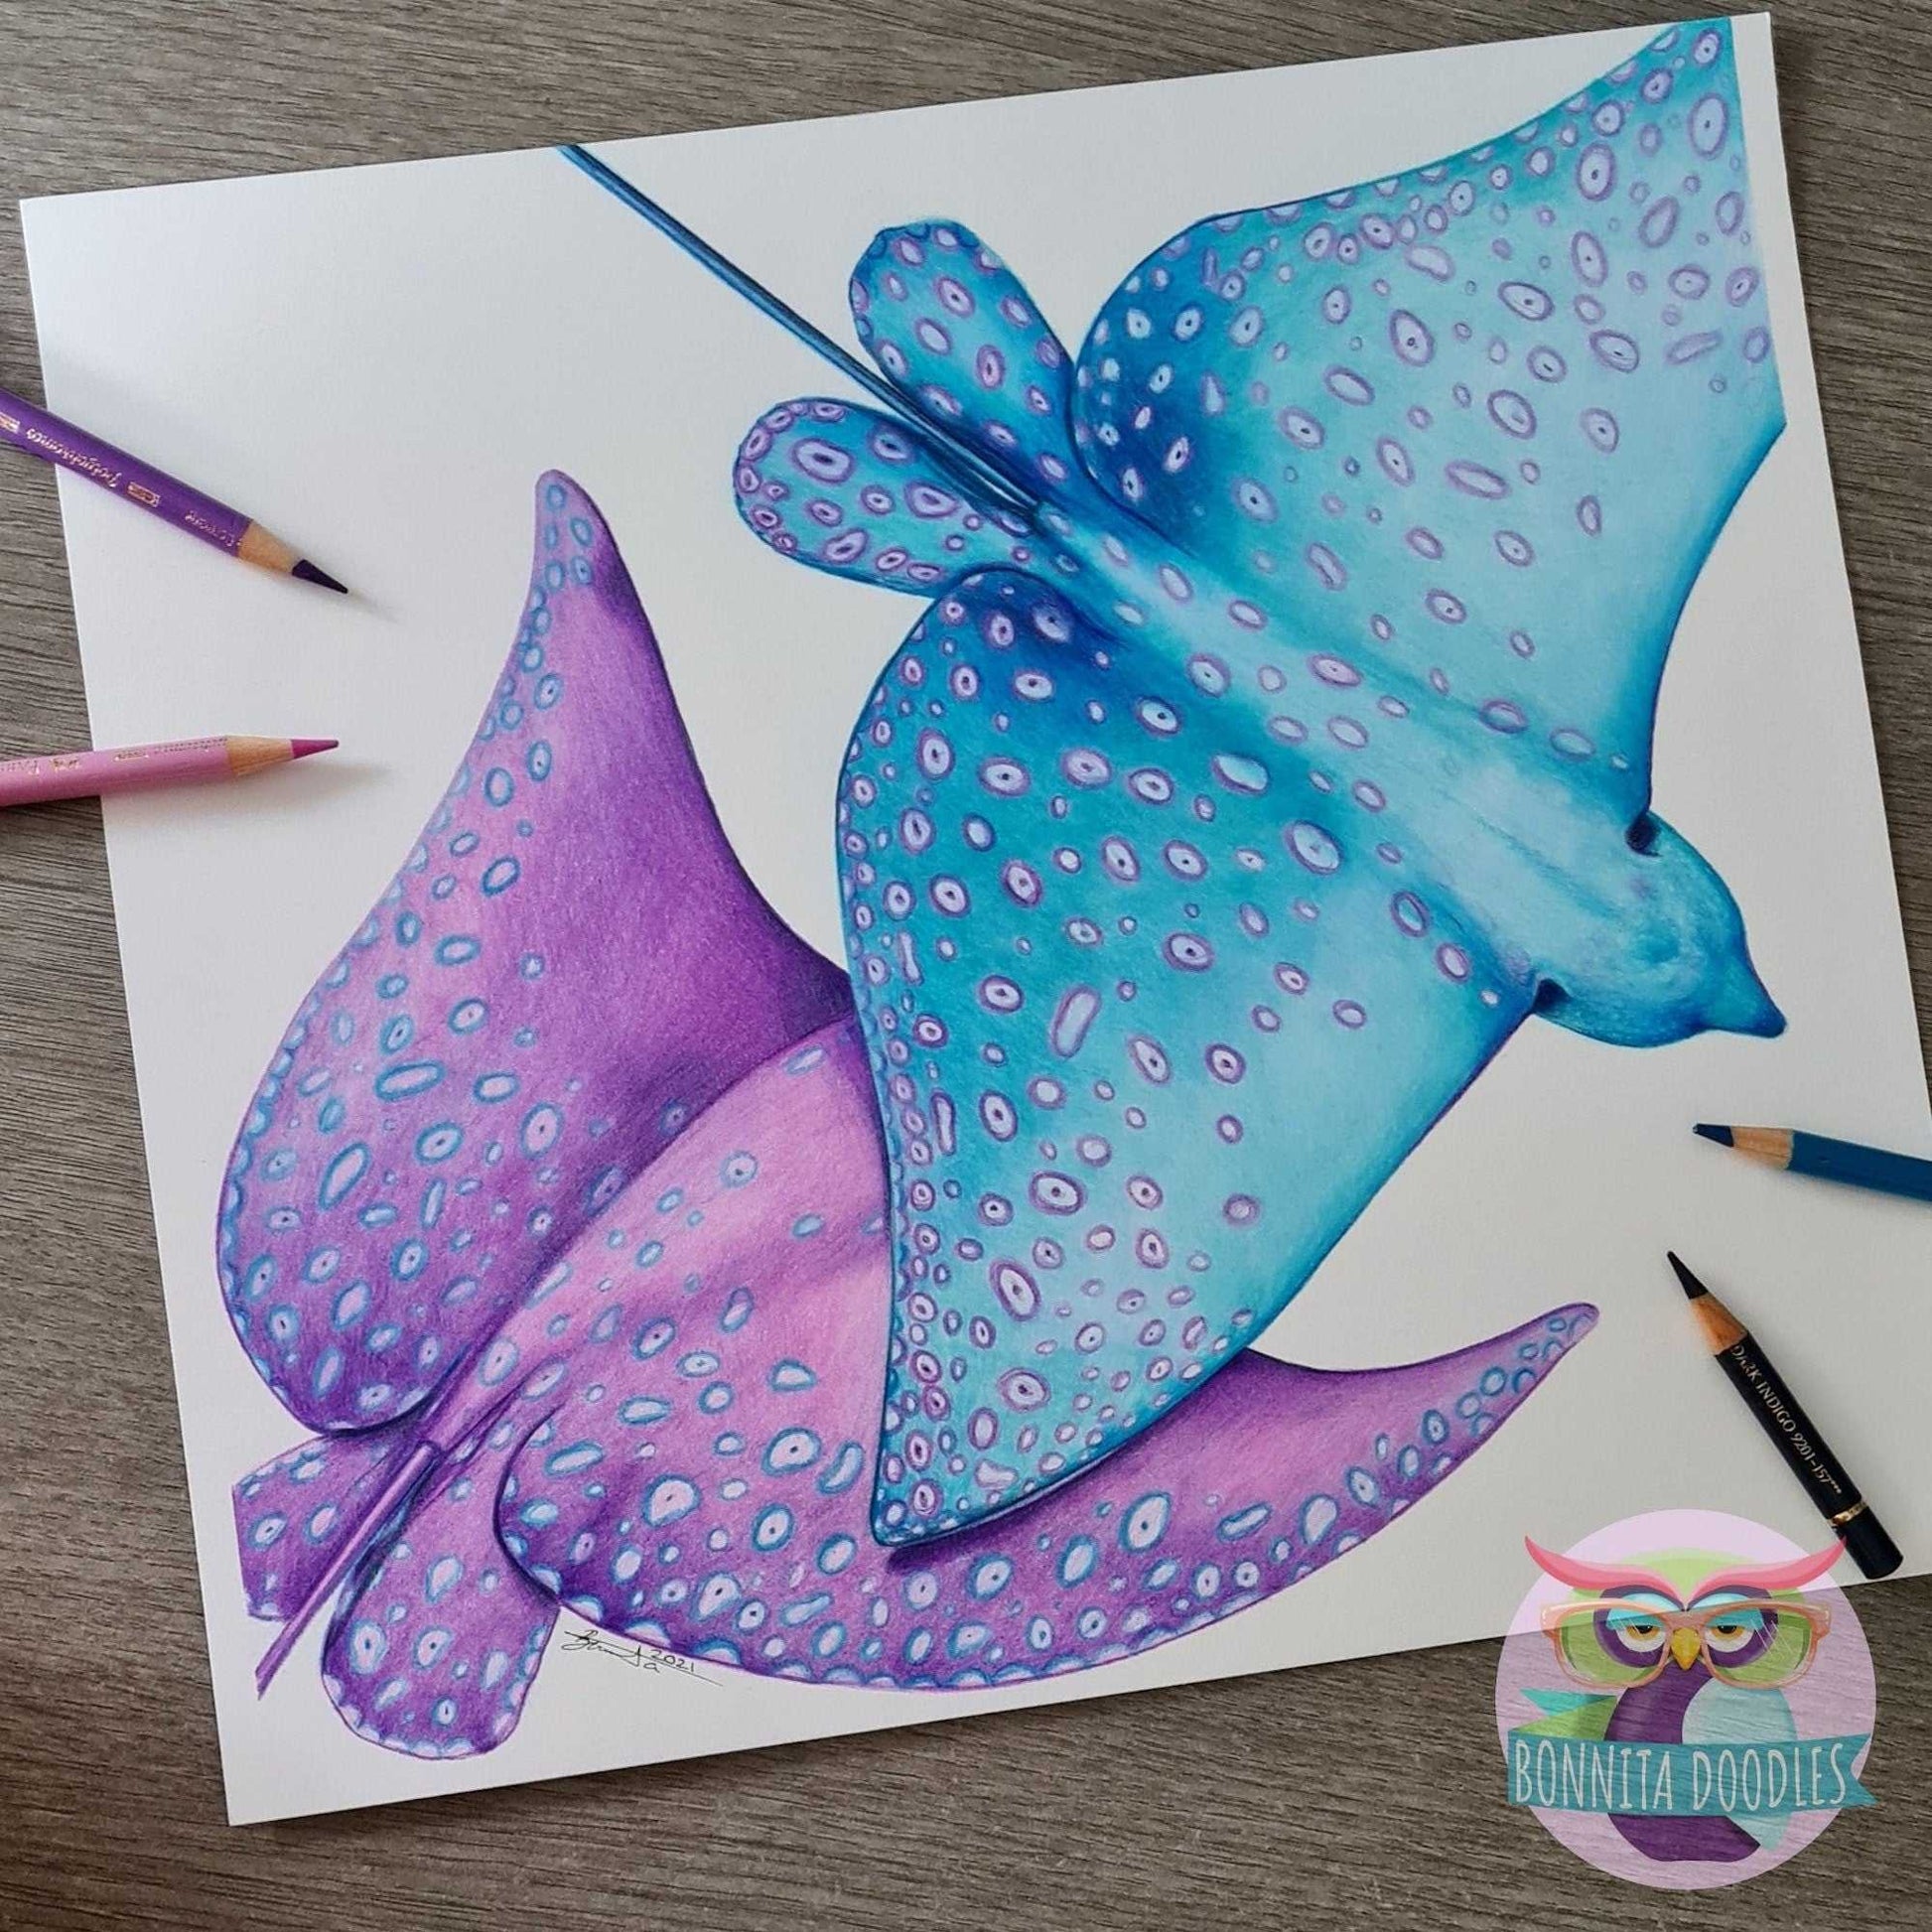 Blue & Purple Spotted Ray - Sapphire Series. Home art print